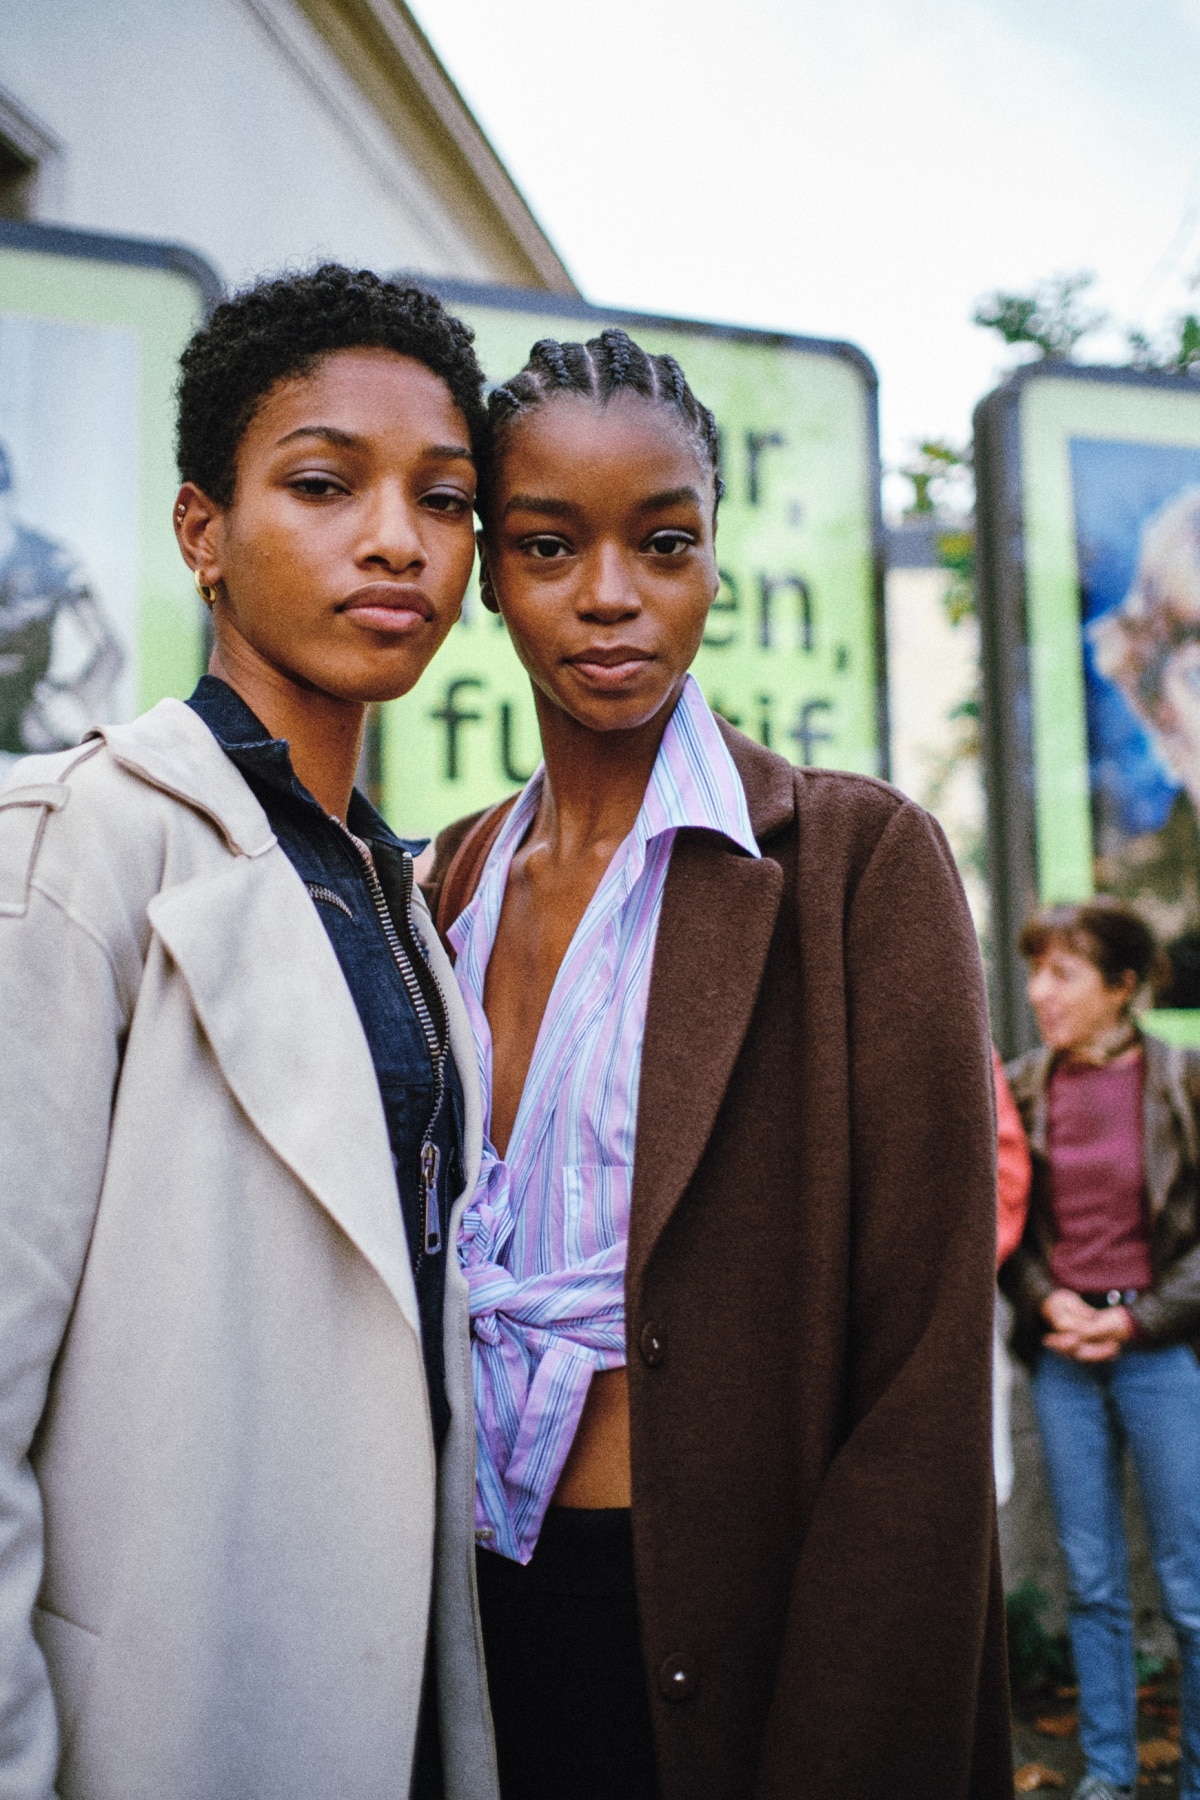 Street style and fresh faces: the muses of Paris Fashion Week - RUSSH